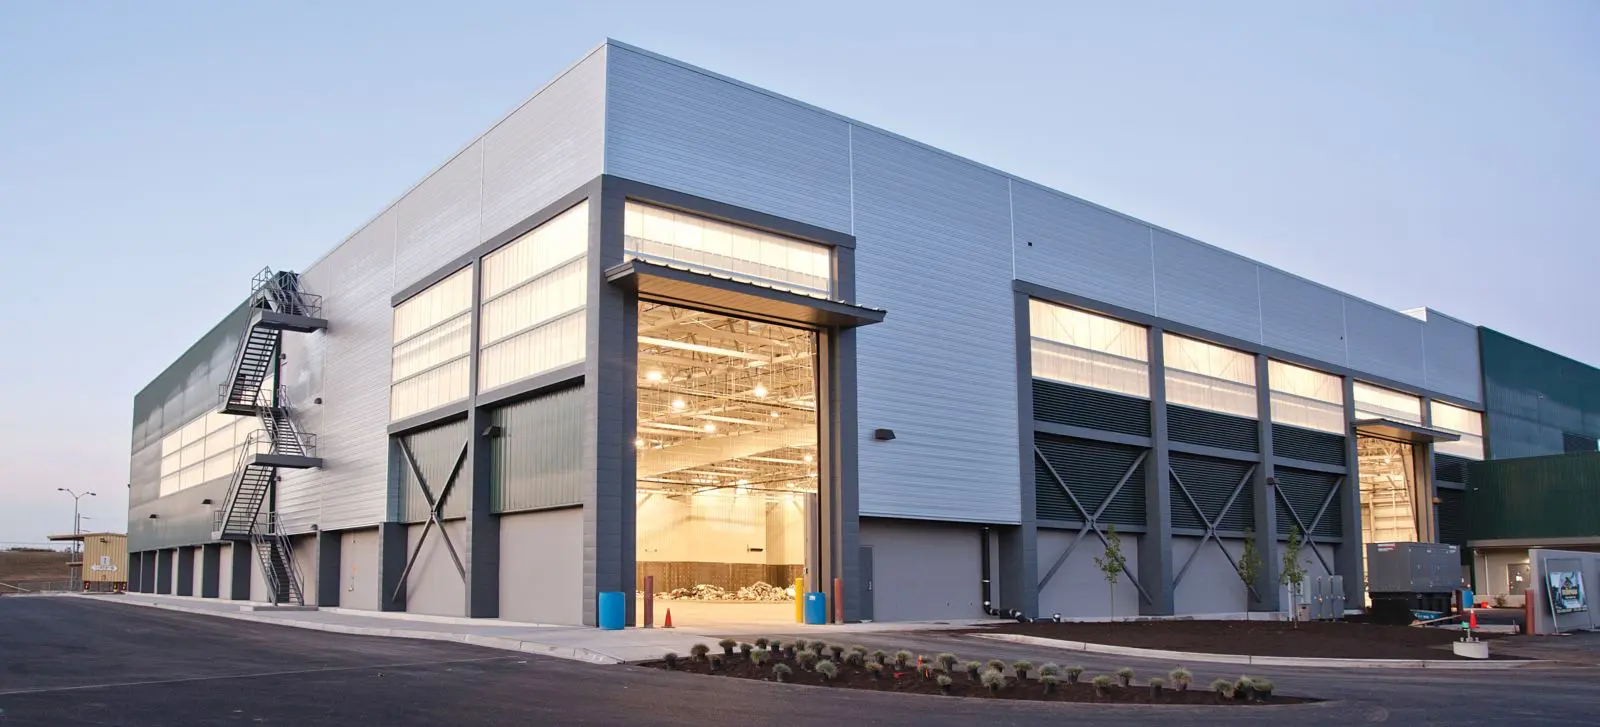 Why Are Prefab Commercial Buildings Popular?